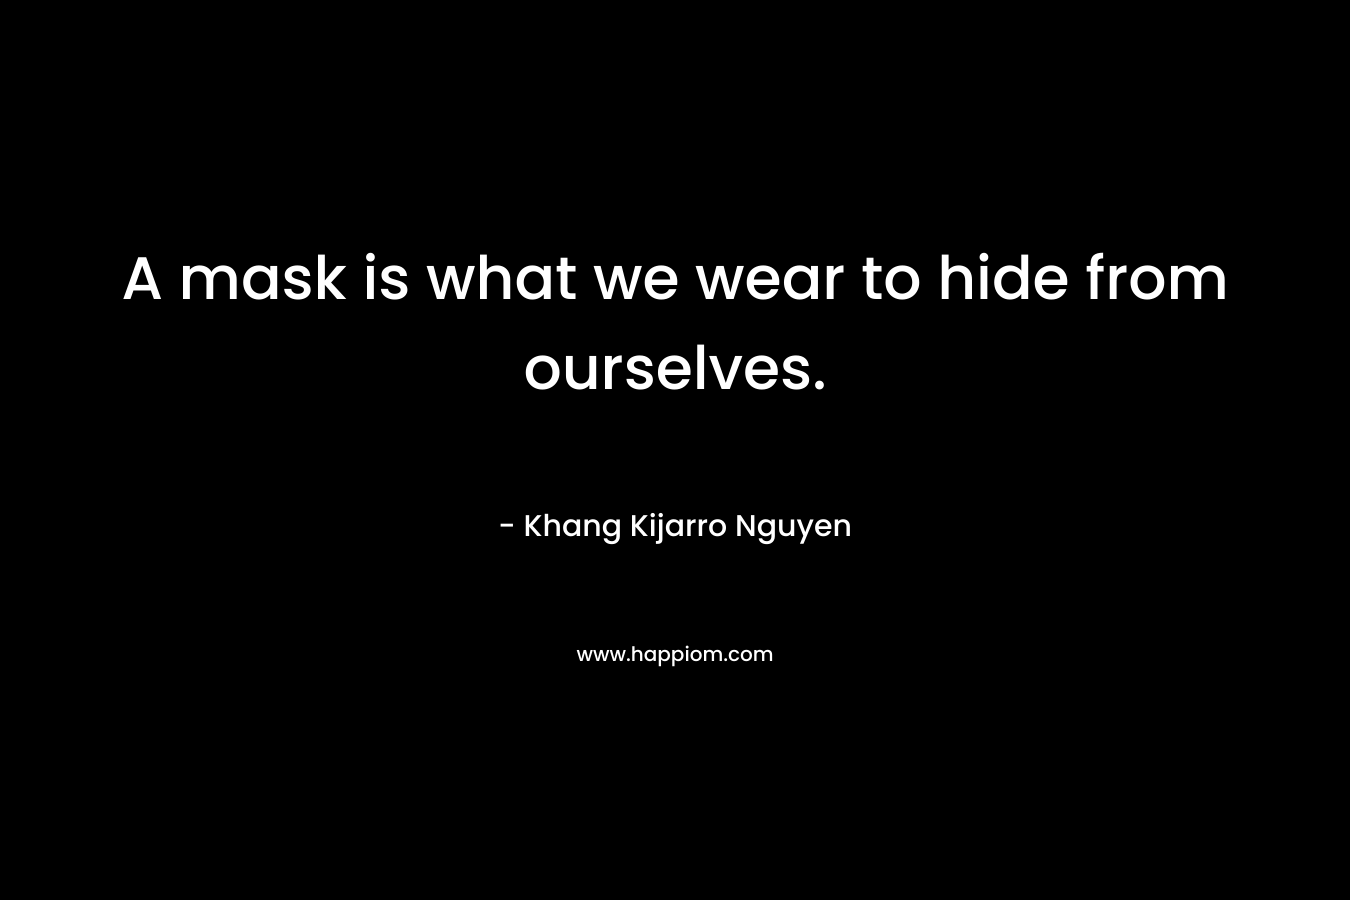 A mask is what we wear to hide from ourselves. – Khang Kijarro Nguyen